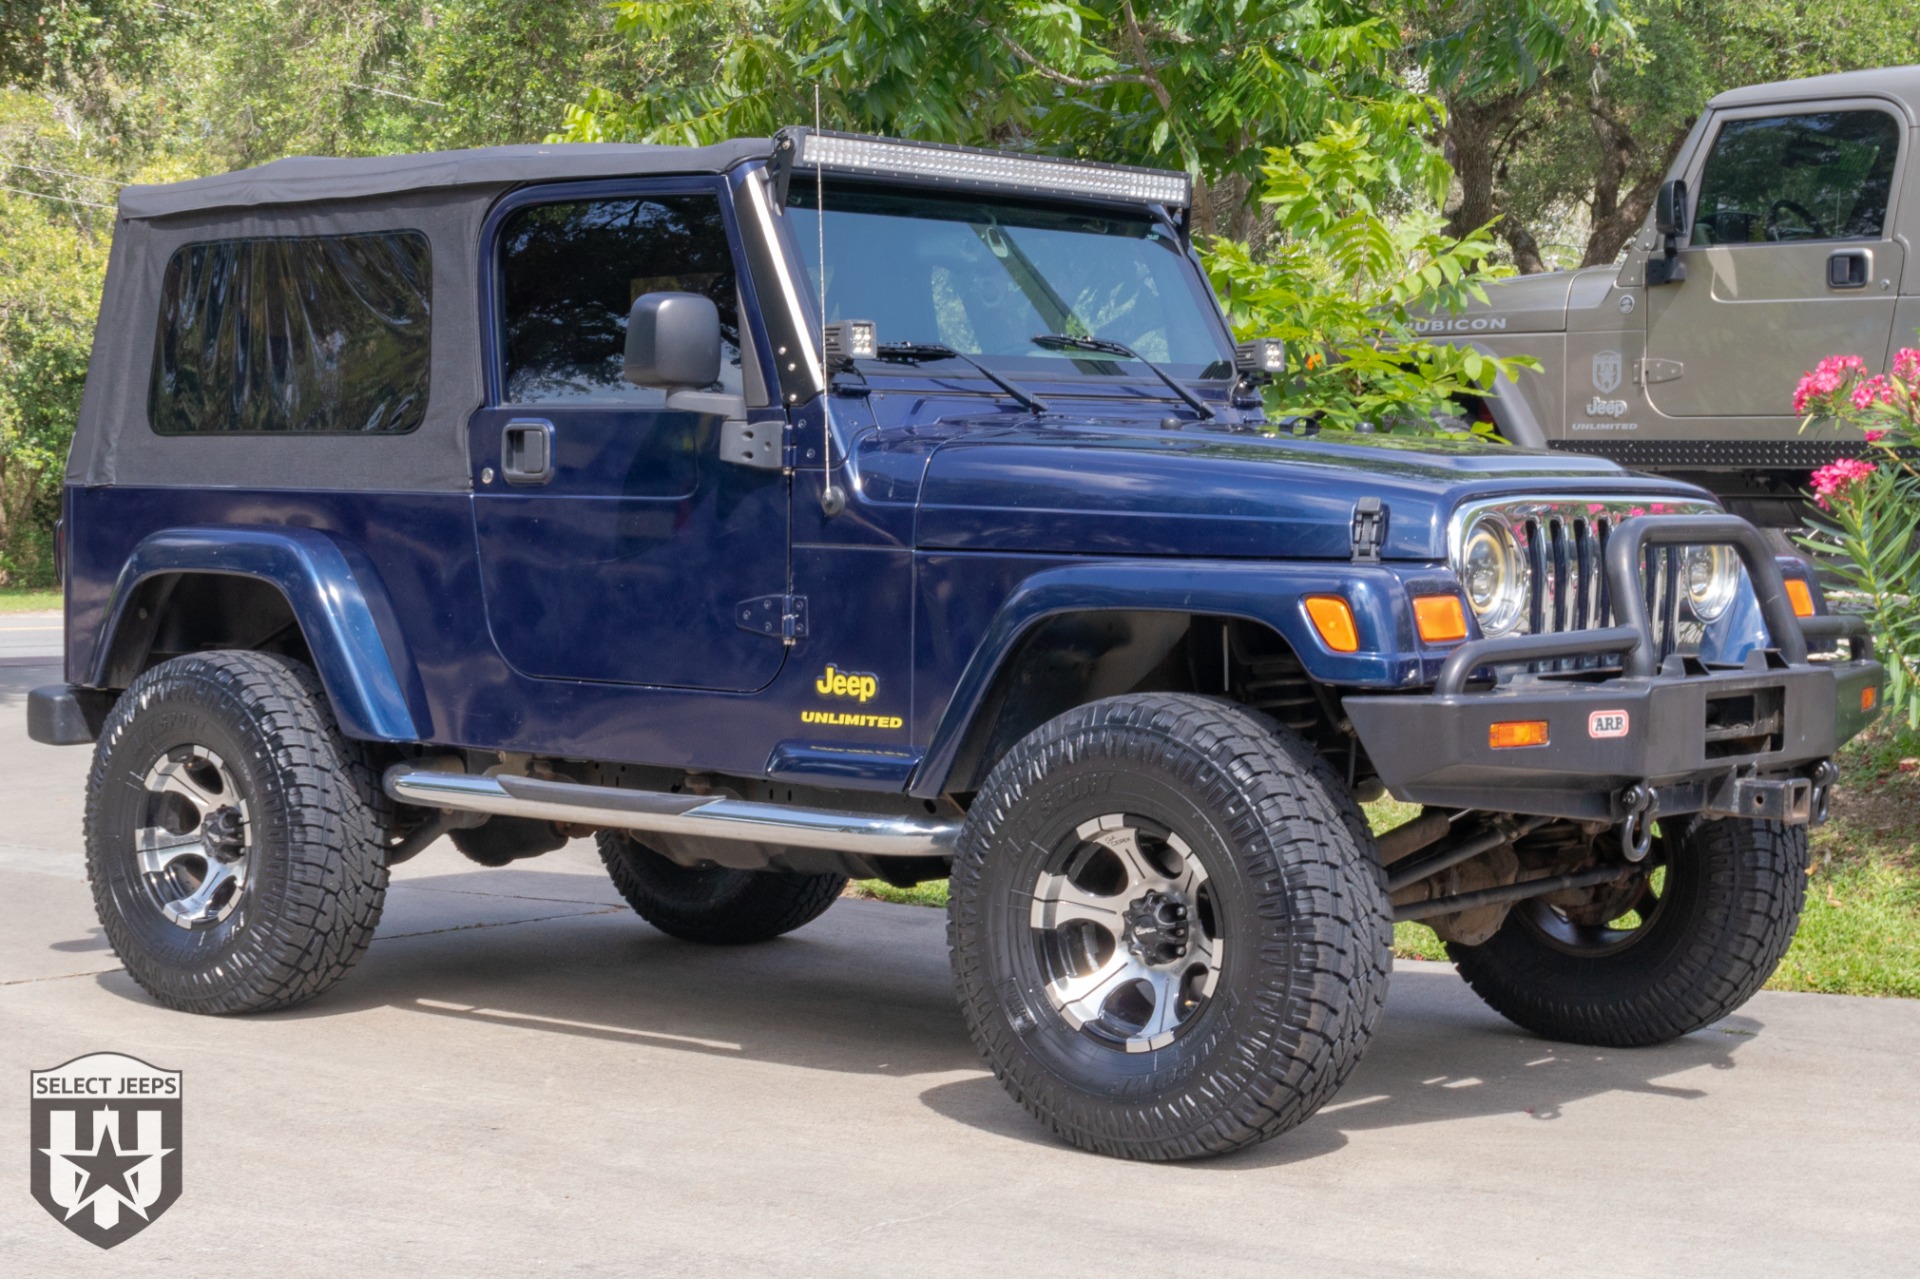 Used 2006 Jeep Wrangler Unlimited For Sale ($22,995) | Select Jeeps Inc.  Stock #759875